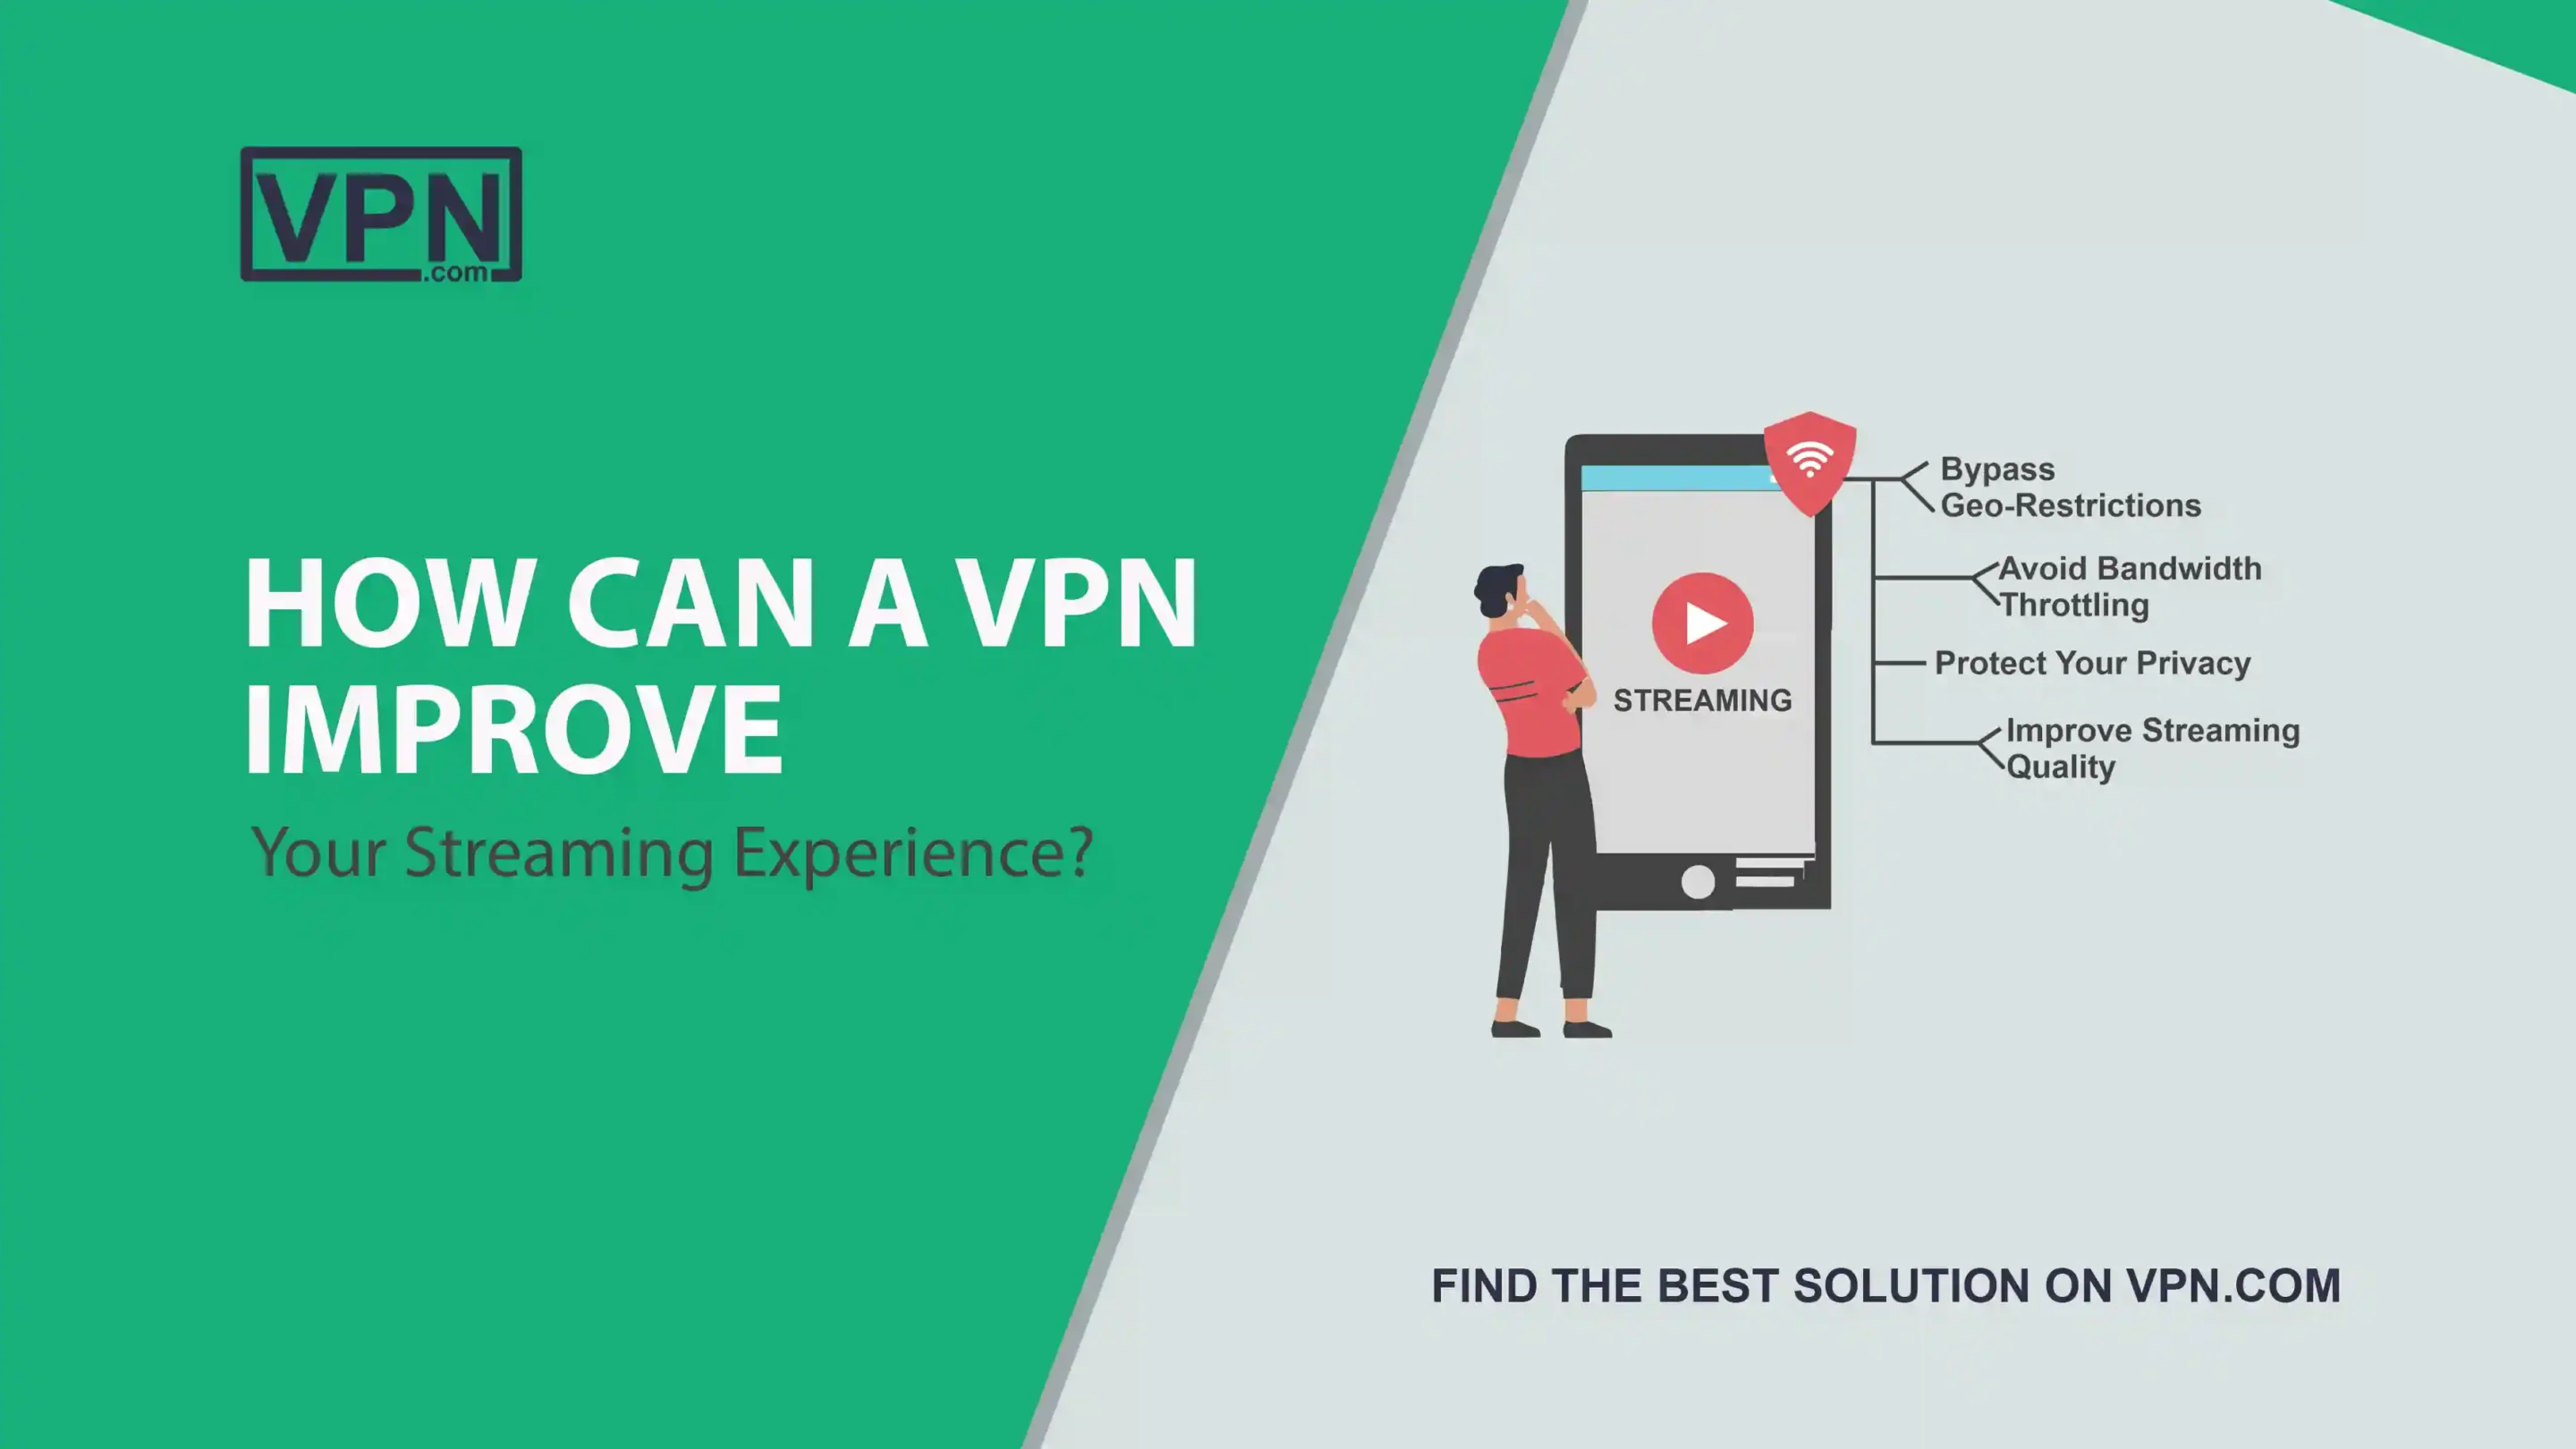 A VPN can Improve Your Streaming Experience